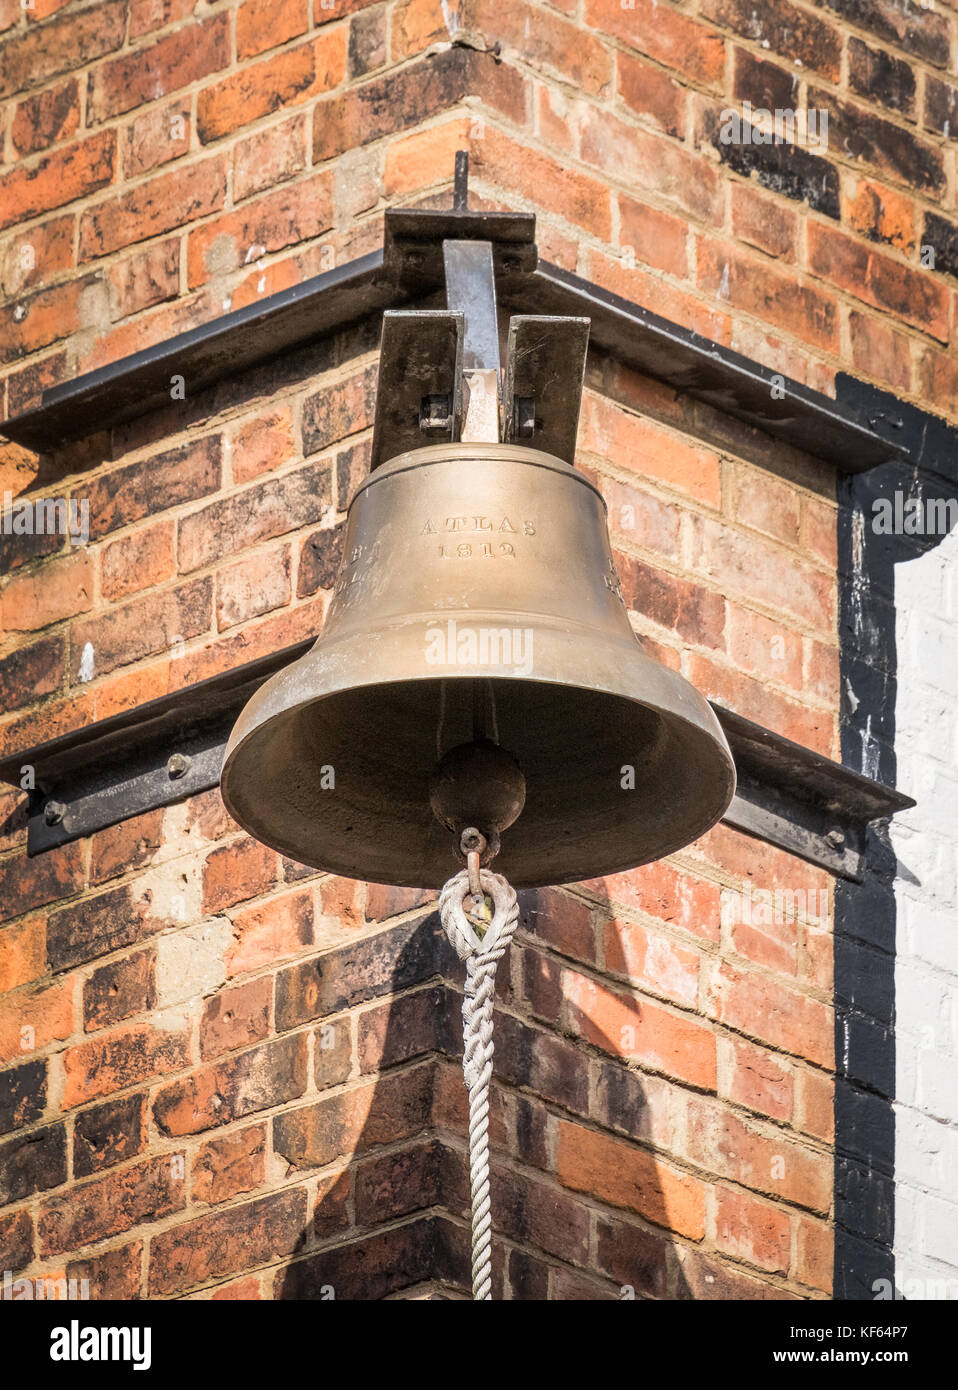 The Atlas Bell, Gloucester Docks. The bell of the Atlas ship, launched in 1812. Later in 1832 it signalled the dockers starting and finishing times. Stock Photo